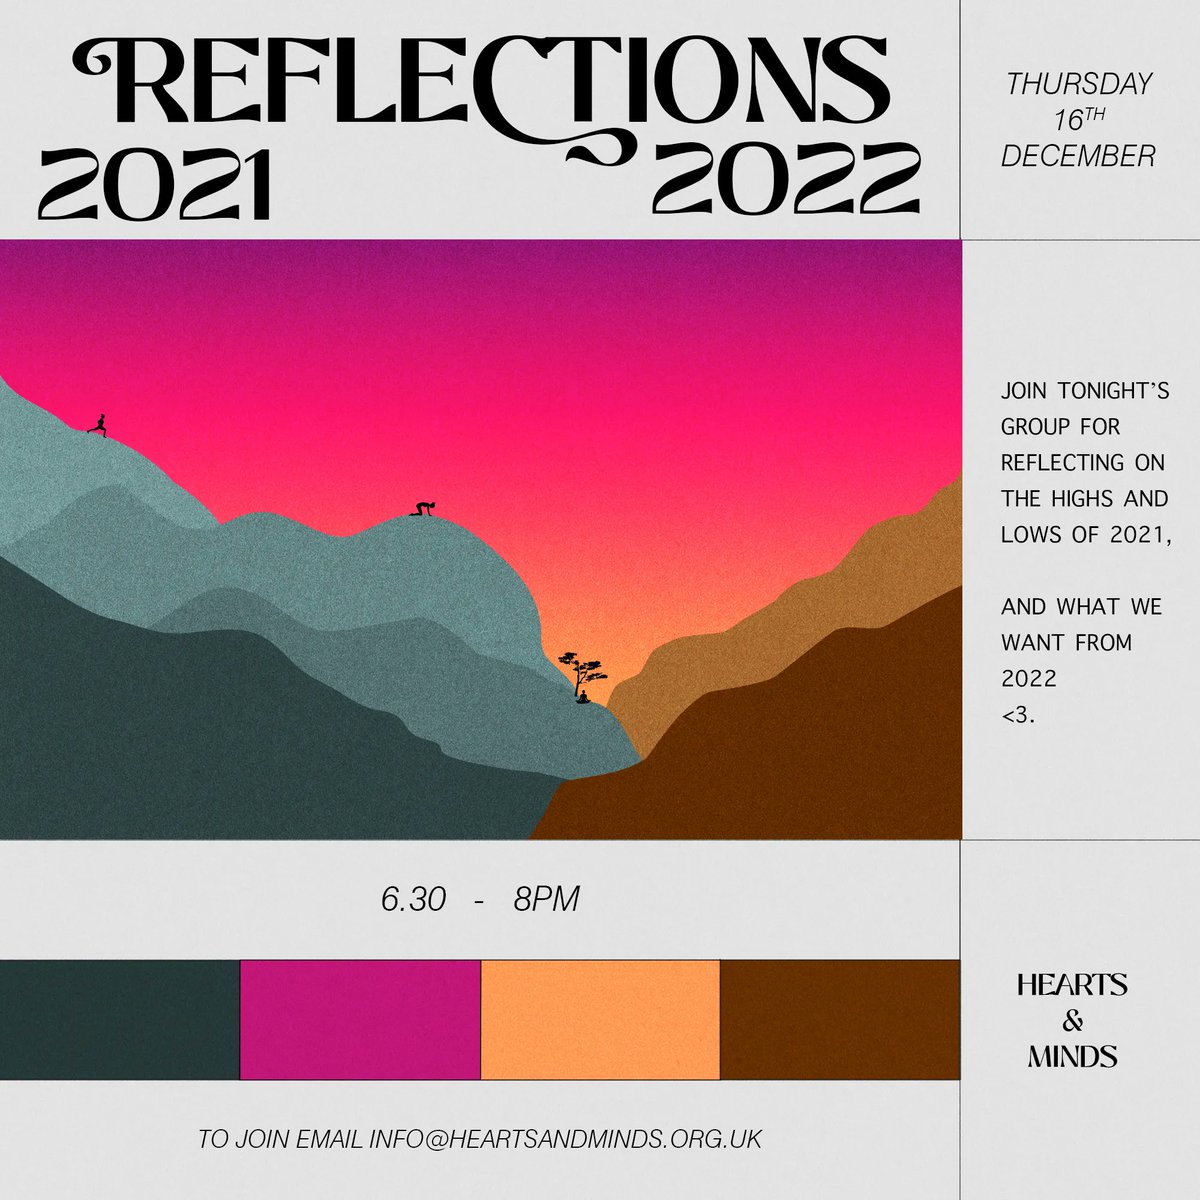 tonight, 6.30 - 8pm! join Jess tonight for a conversation where we take time to reflect and share on the past year and imagine what we want for the next. 🌄🧗🏽‍♂️⛵️⌛️⏳♾